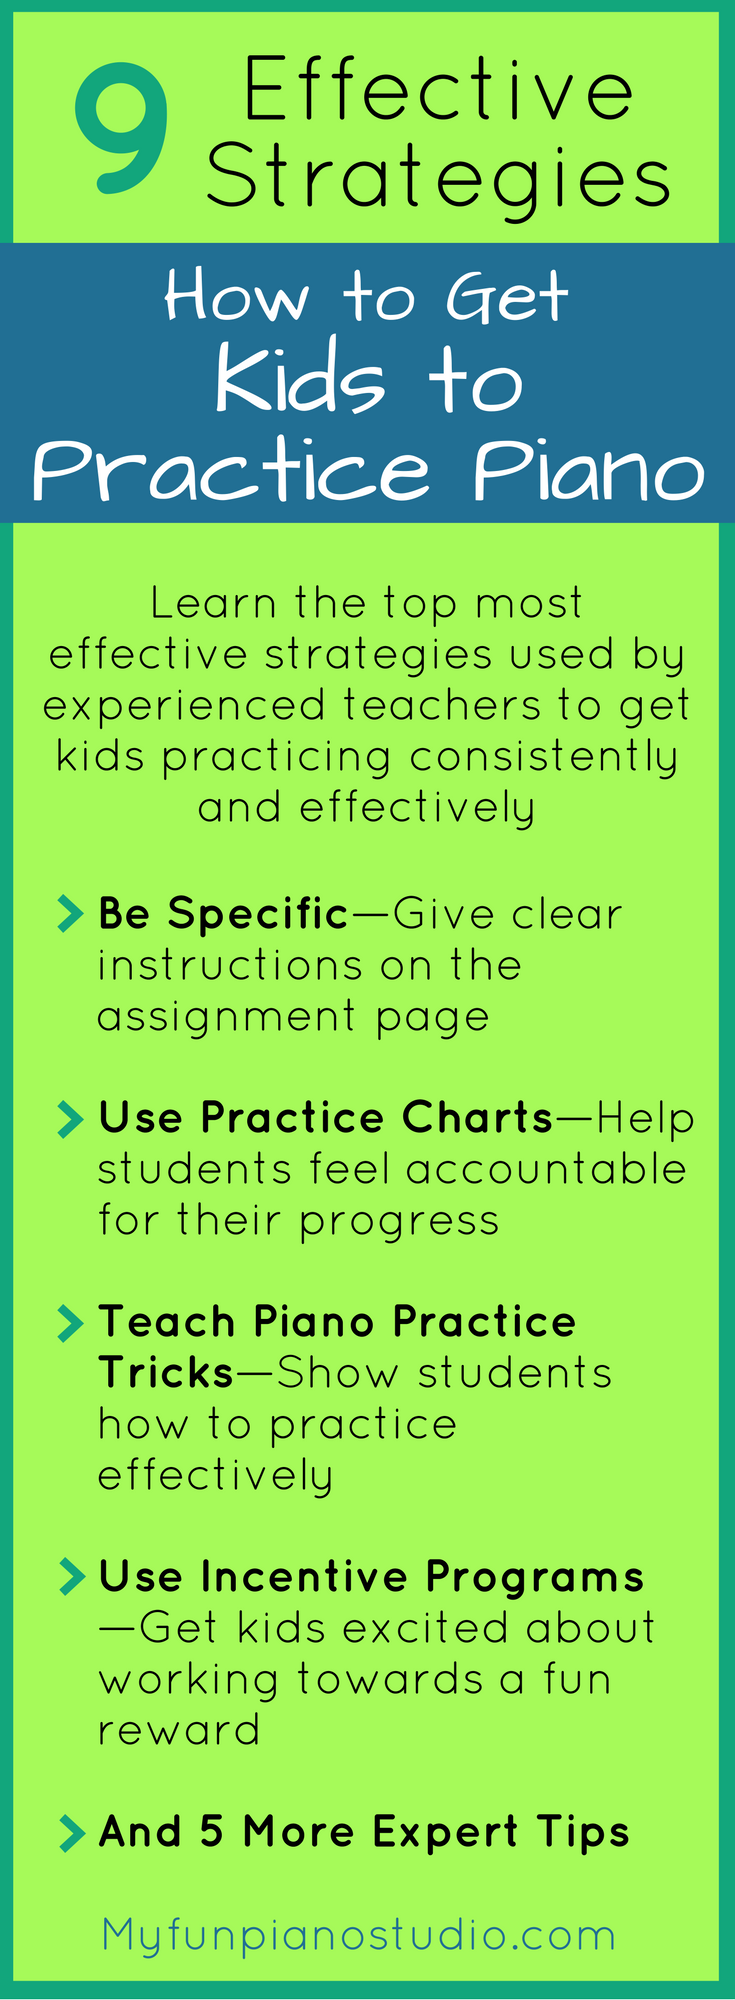 How to Get Kids to Practice Piano